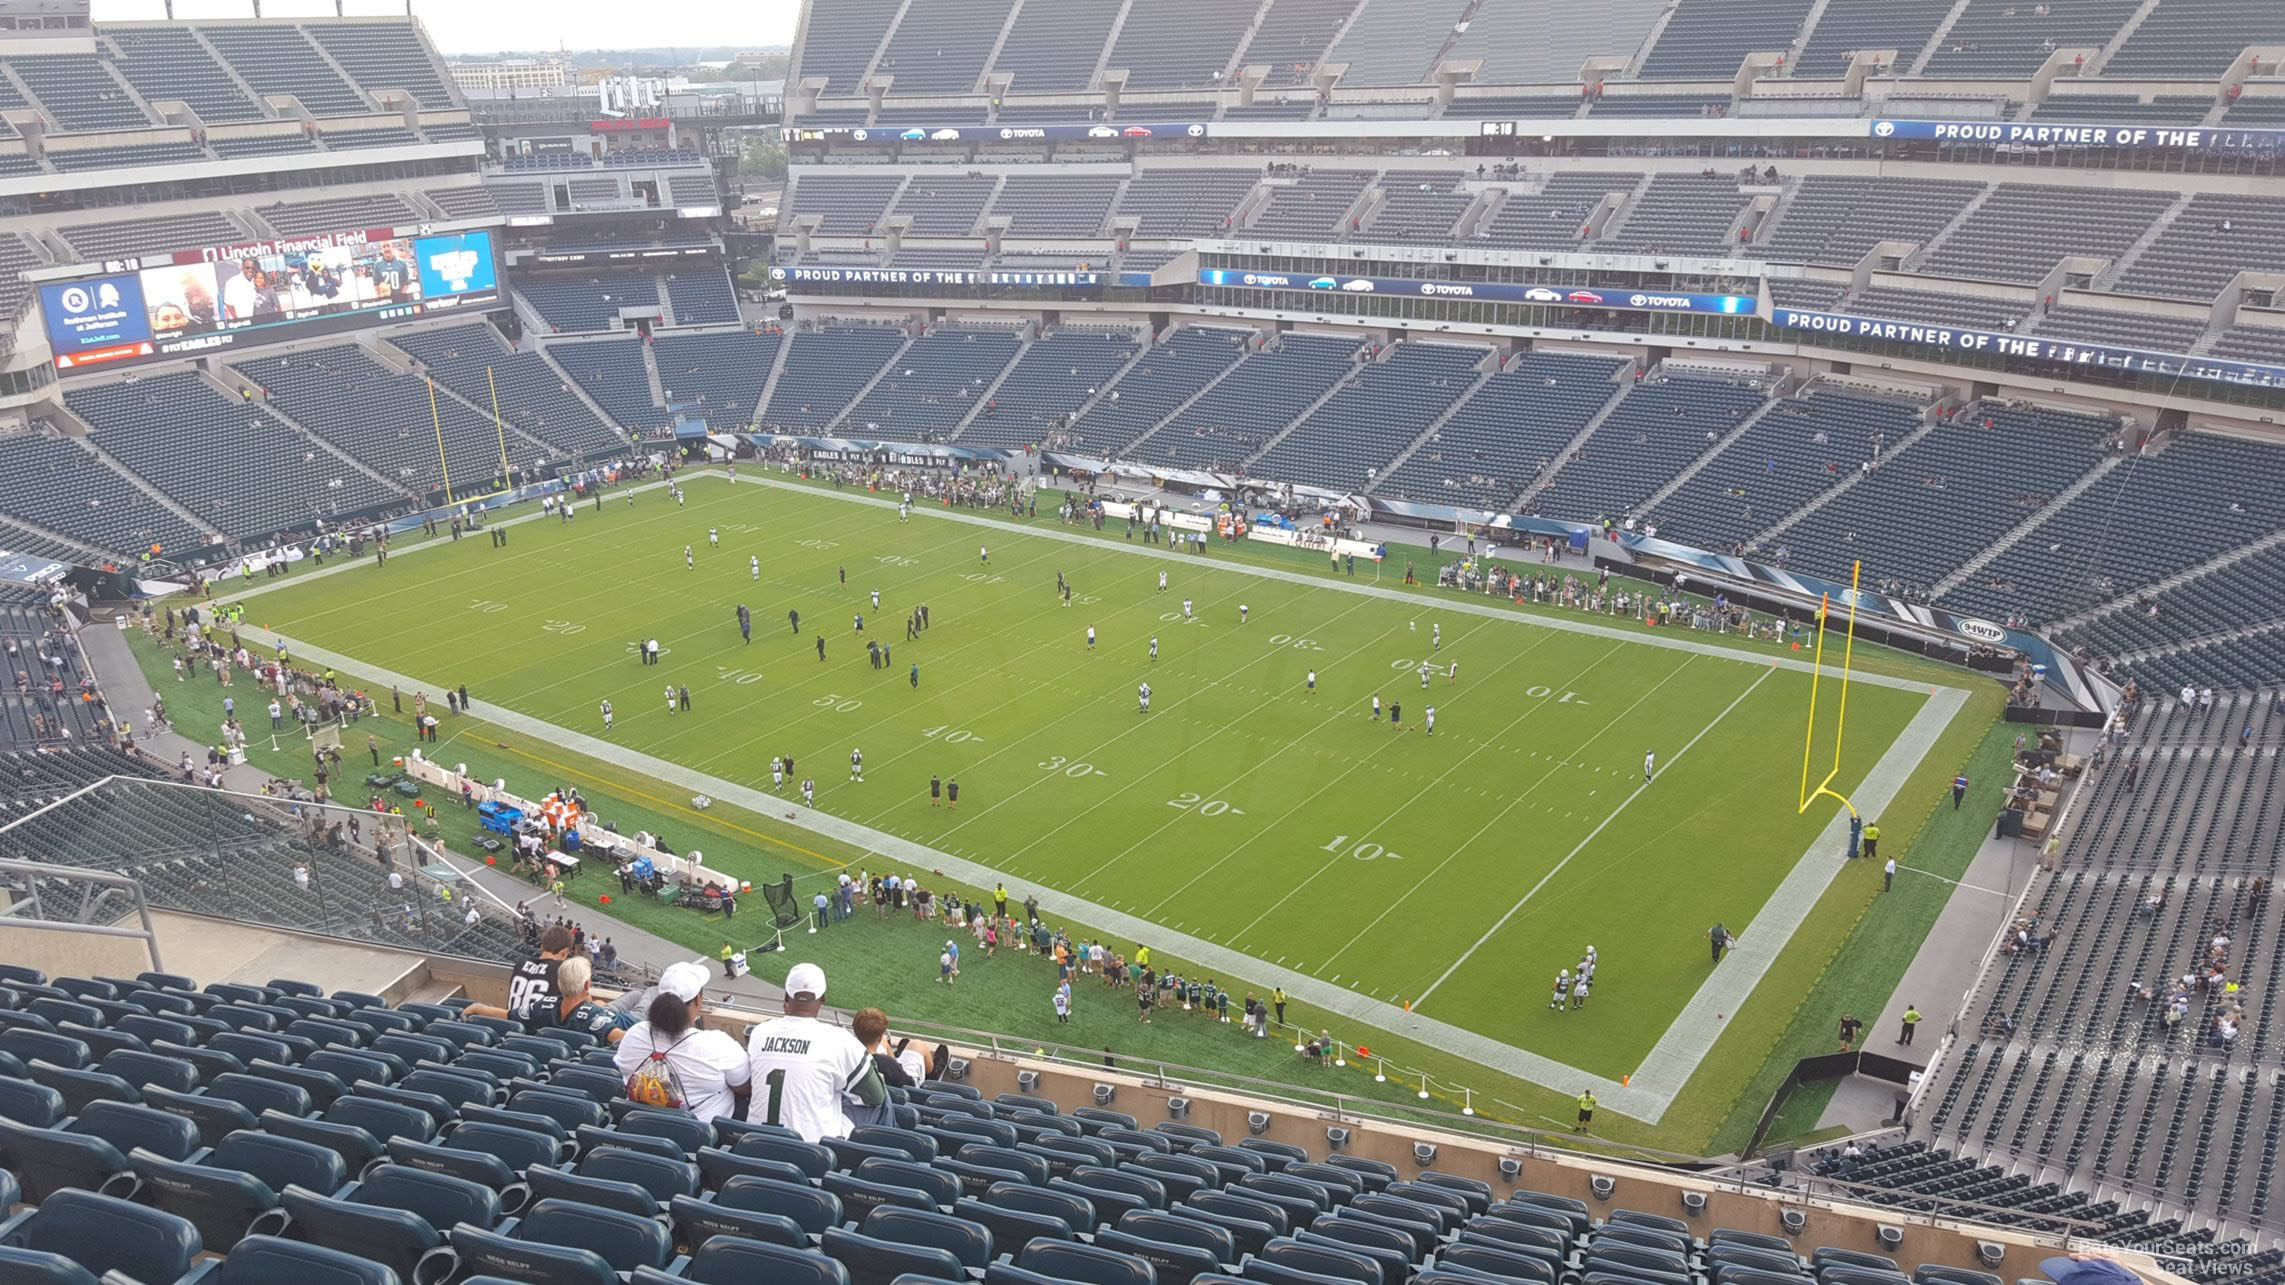 section 230, row 15 seat view  for football - lincoln financial field